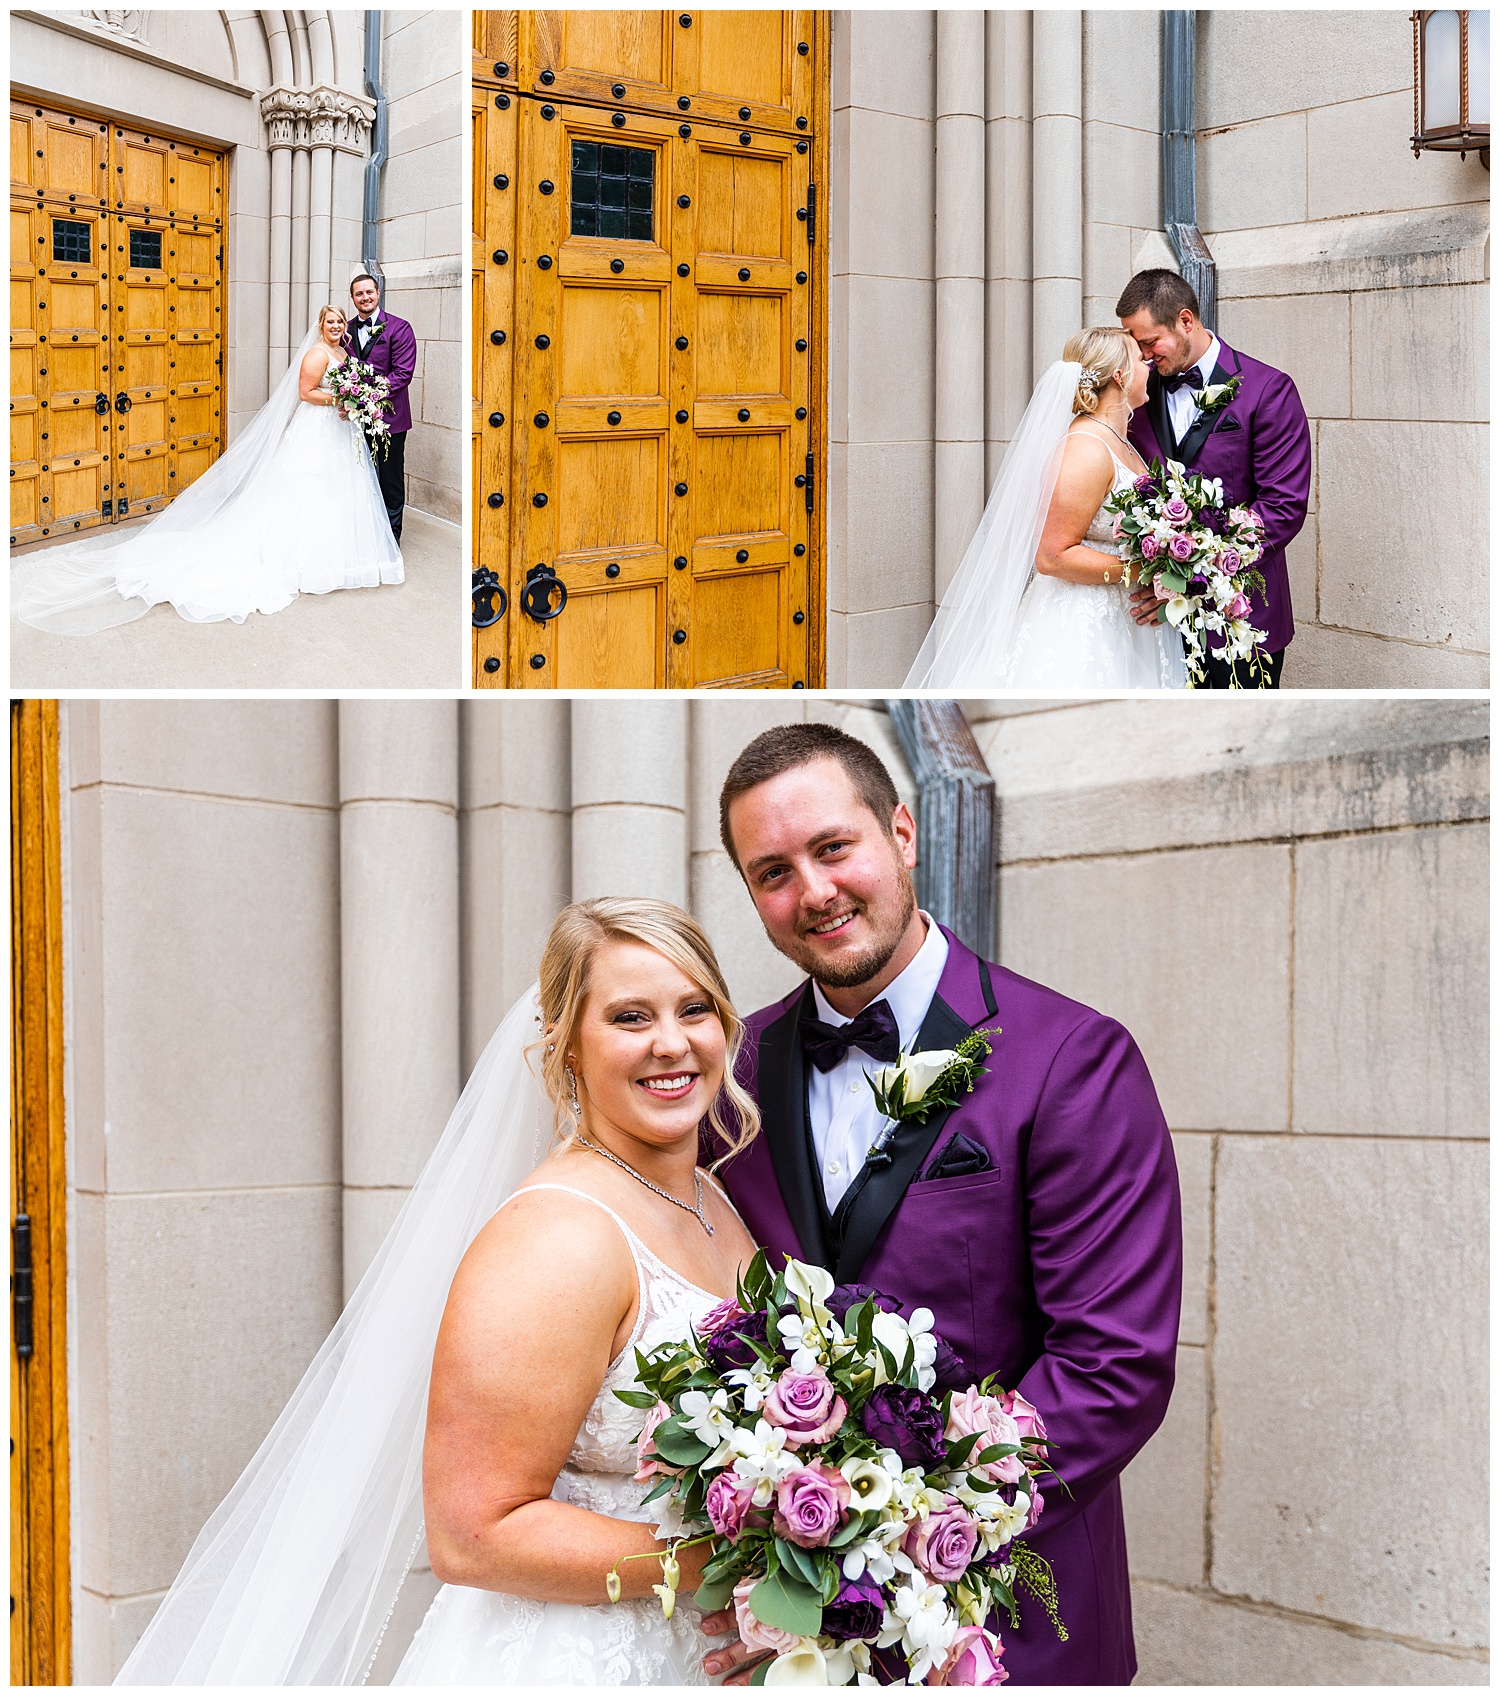 Groom in purple tux jacket poses with bride